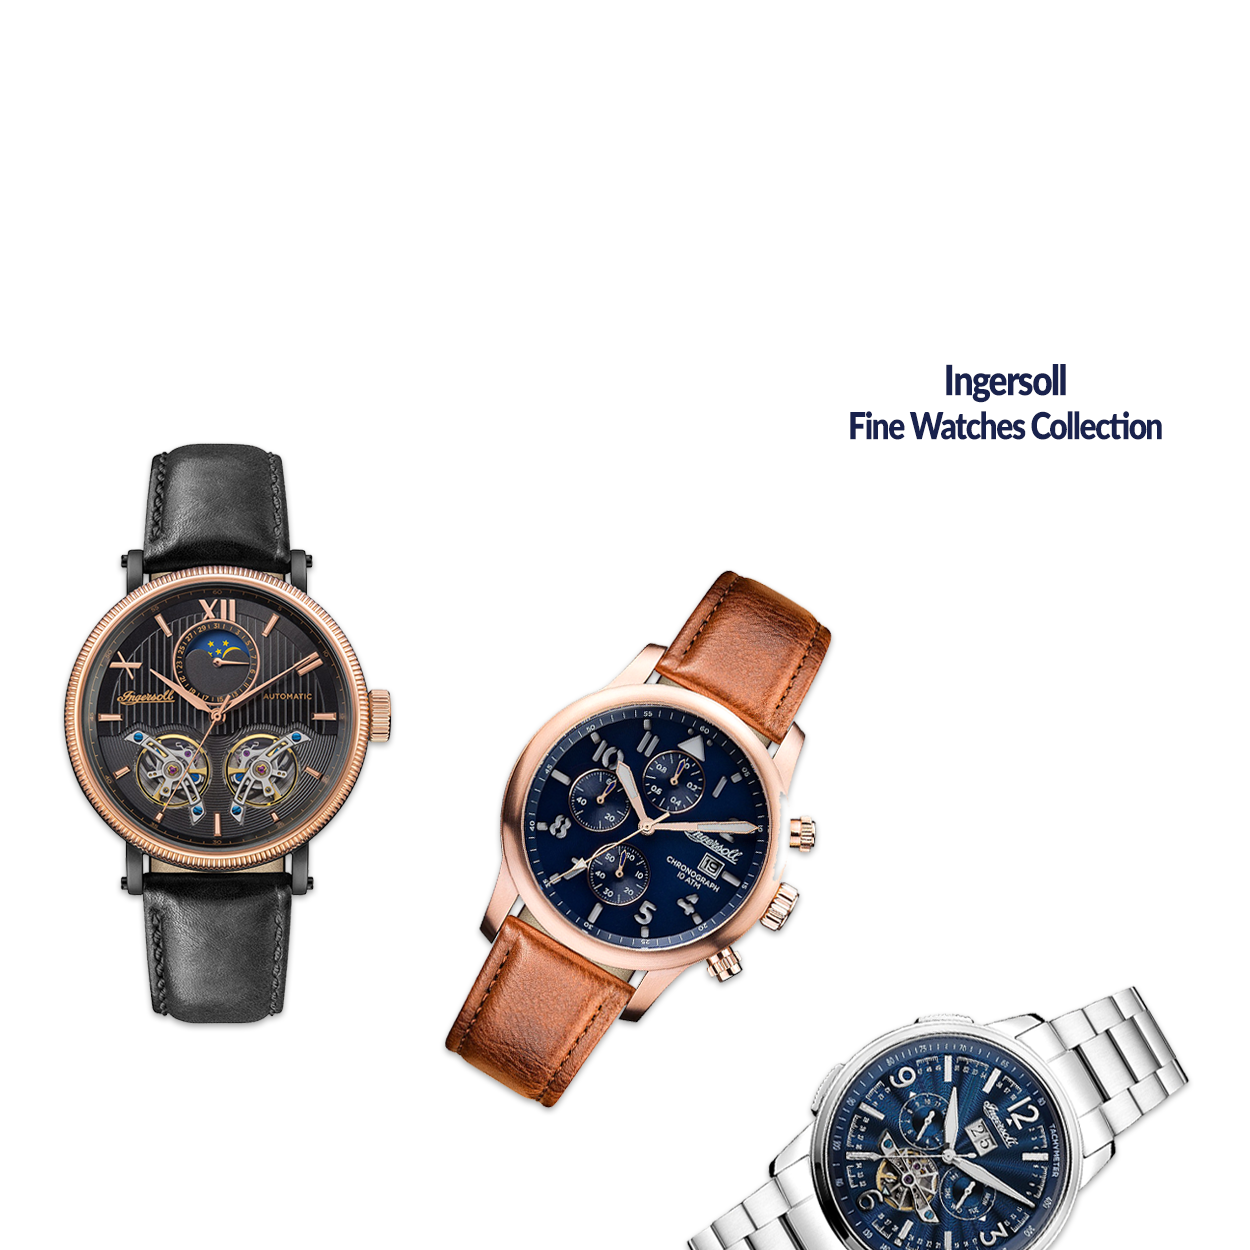 Ingersoll fine watches collection